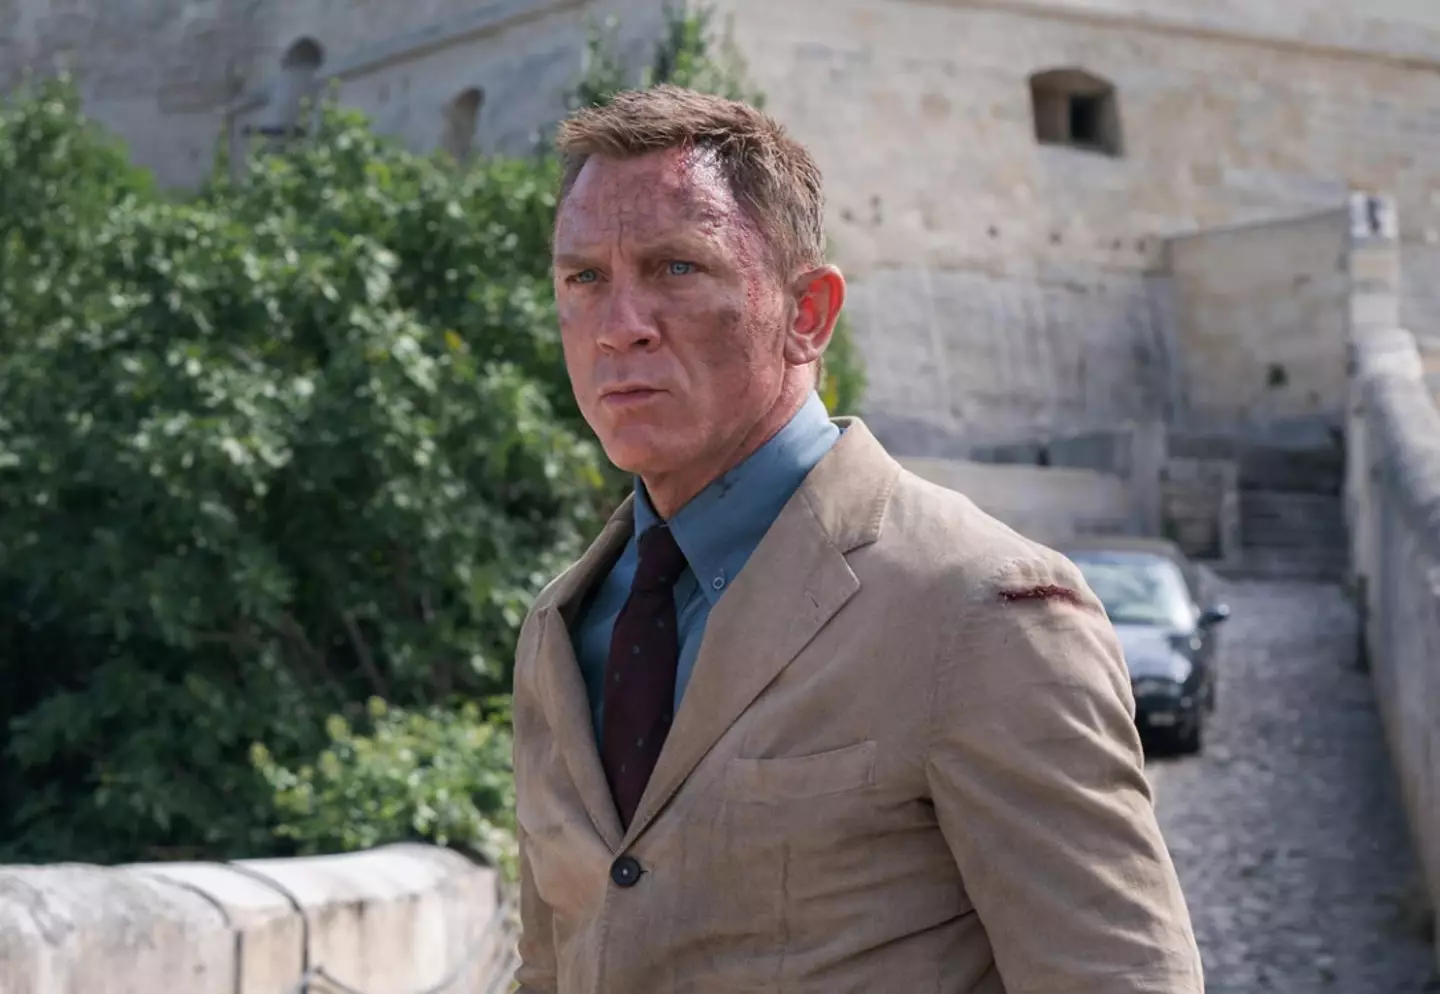 The role of James Bond is up for grabs after Daniel Craig's departure.